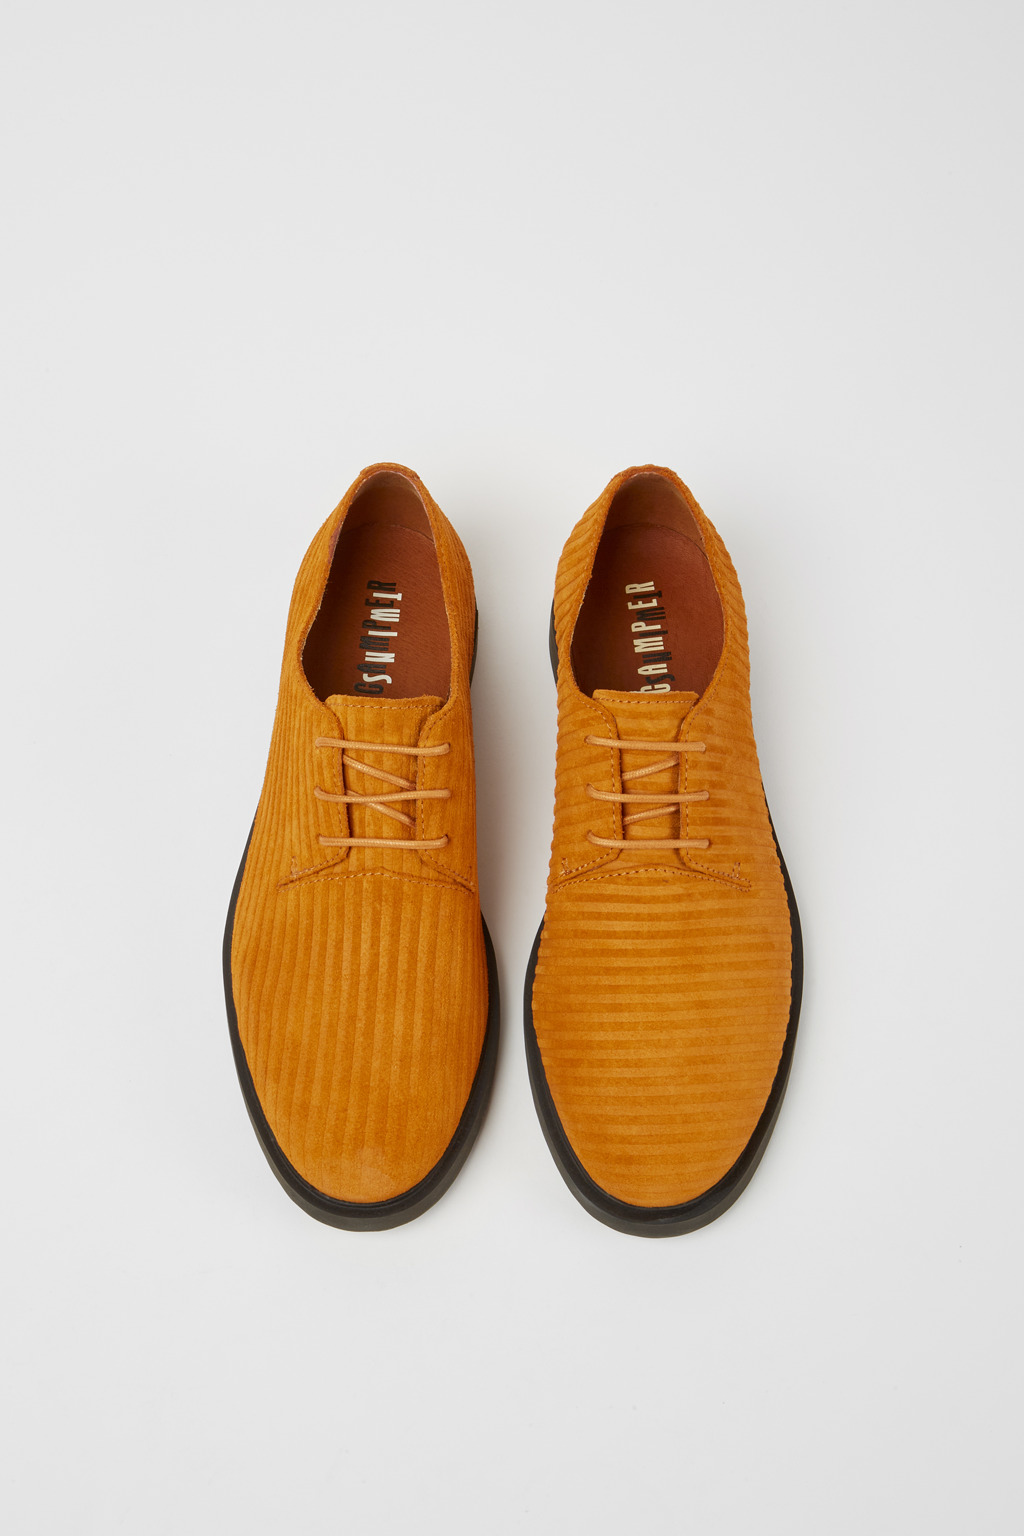 Twins Orange Formal Shoes for Women - Fall/Winter collection 